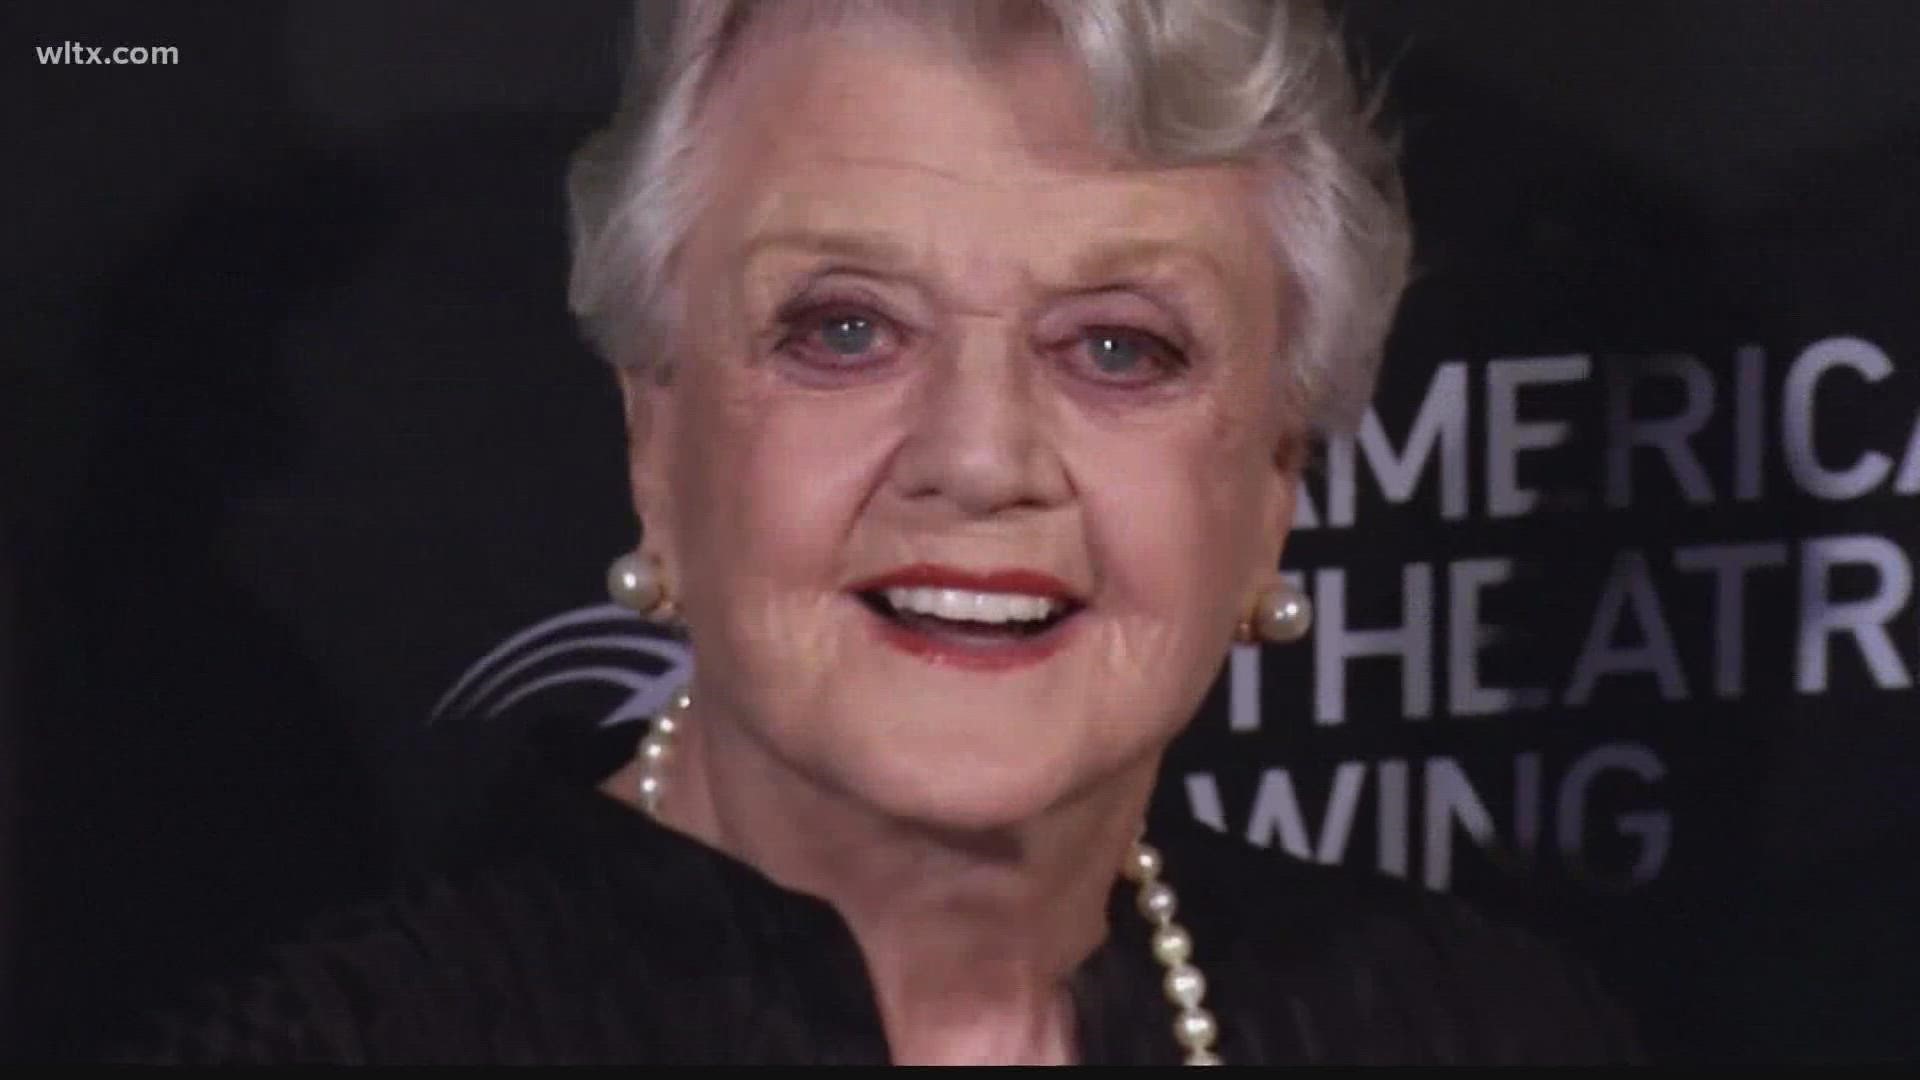 Lansbury is best known for her roles in "The Manchurian Candidate," "Beauty and the Beast" and as crime-solving novelist Jessica Fletcher on "Murder, She Wrote."